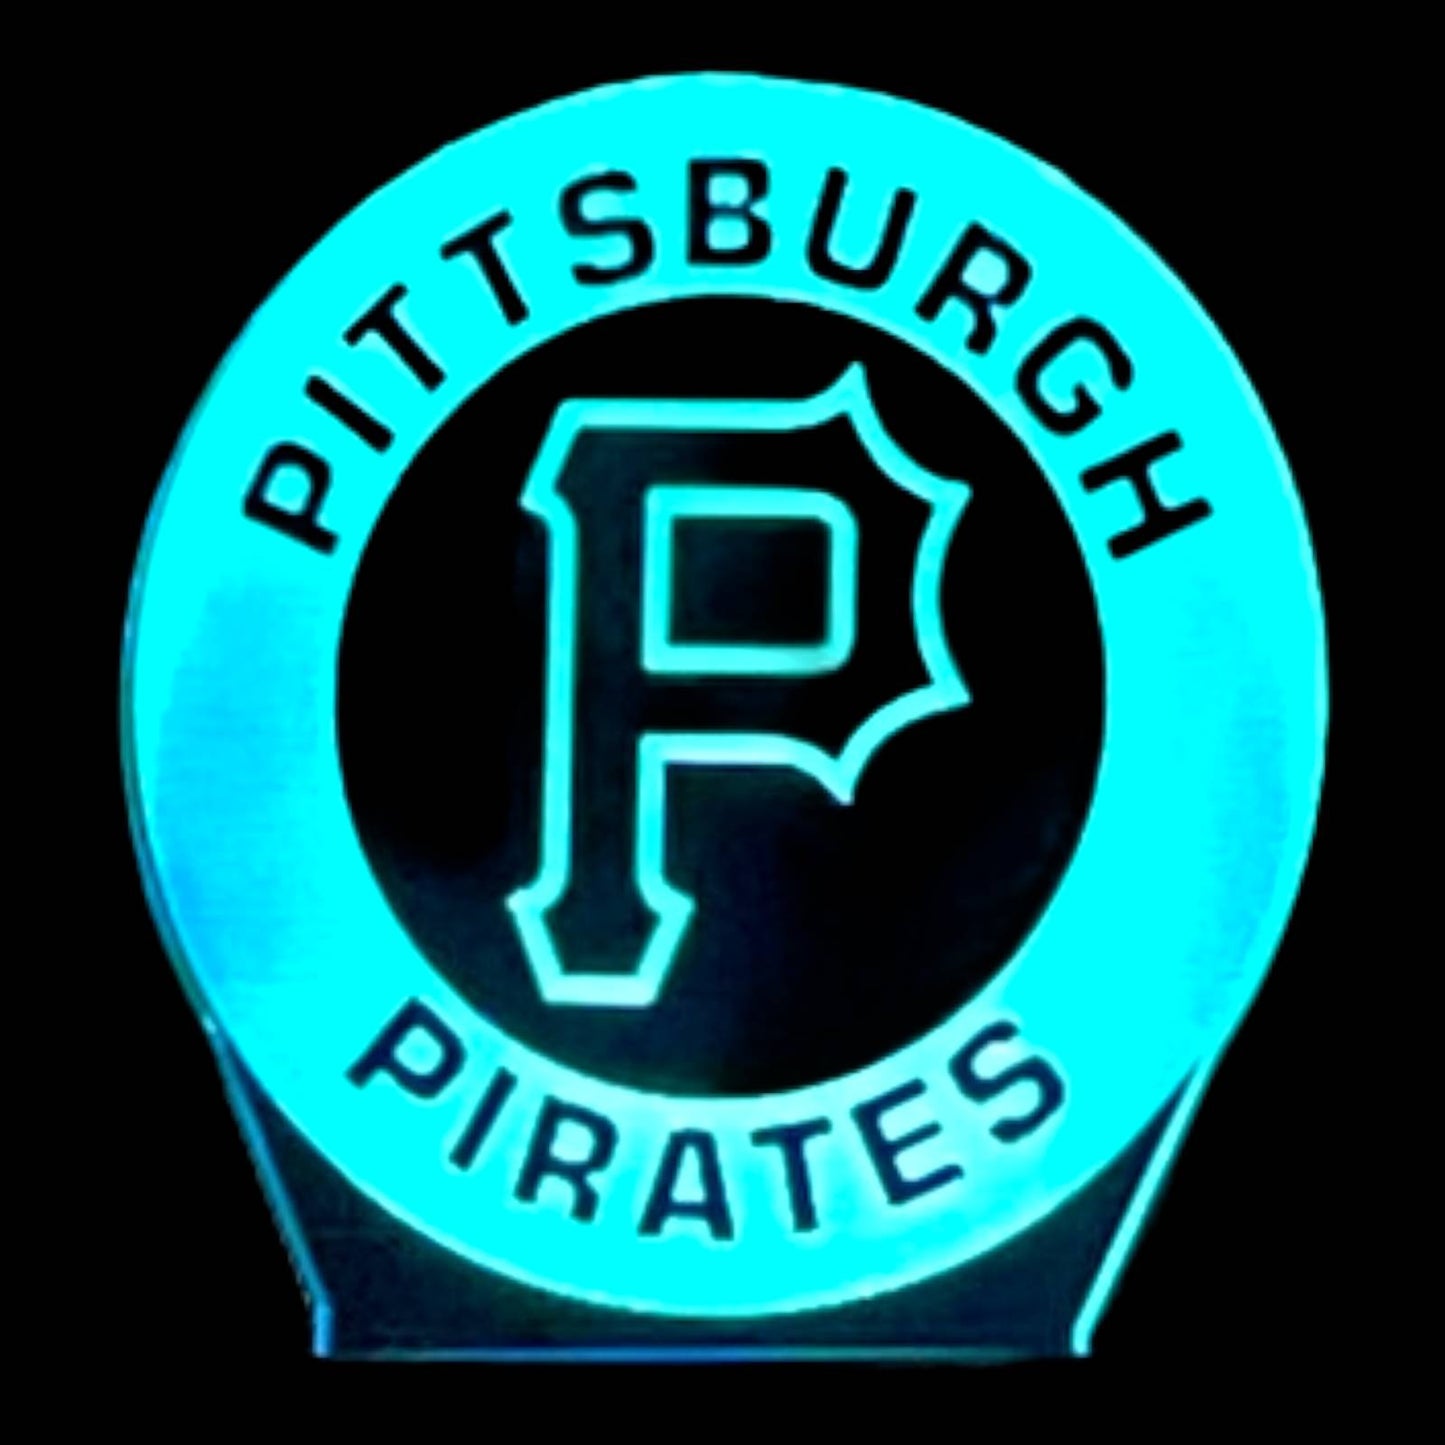 Pittsburgh Pirates 3D LED Night-Light 7 Color Changing Lamp w/ Touch Switch